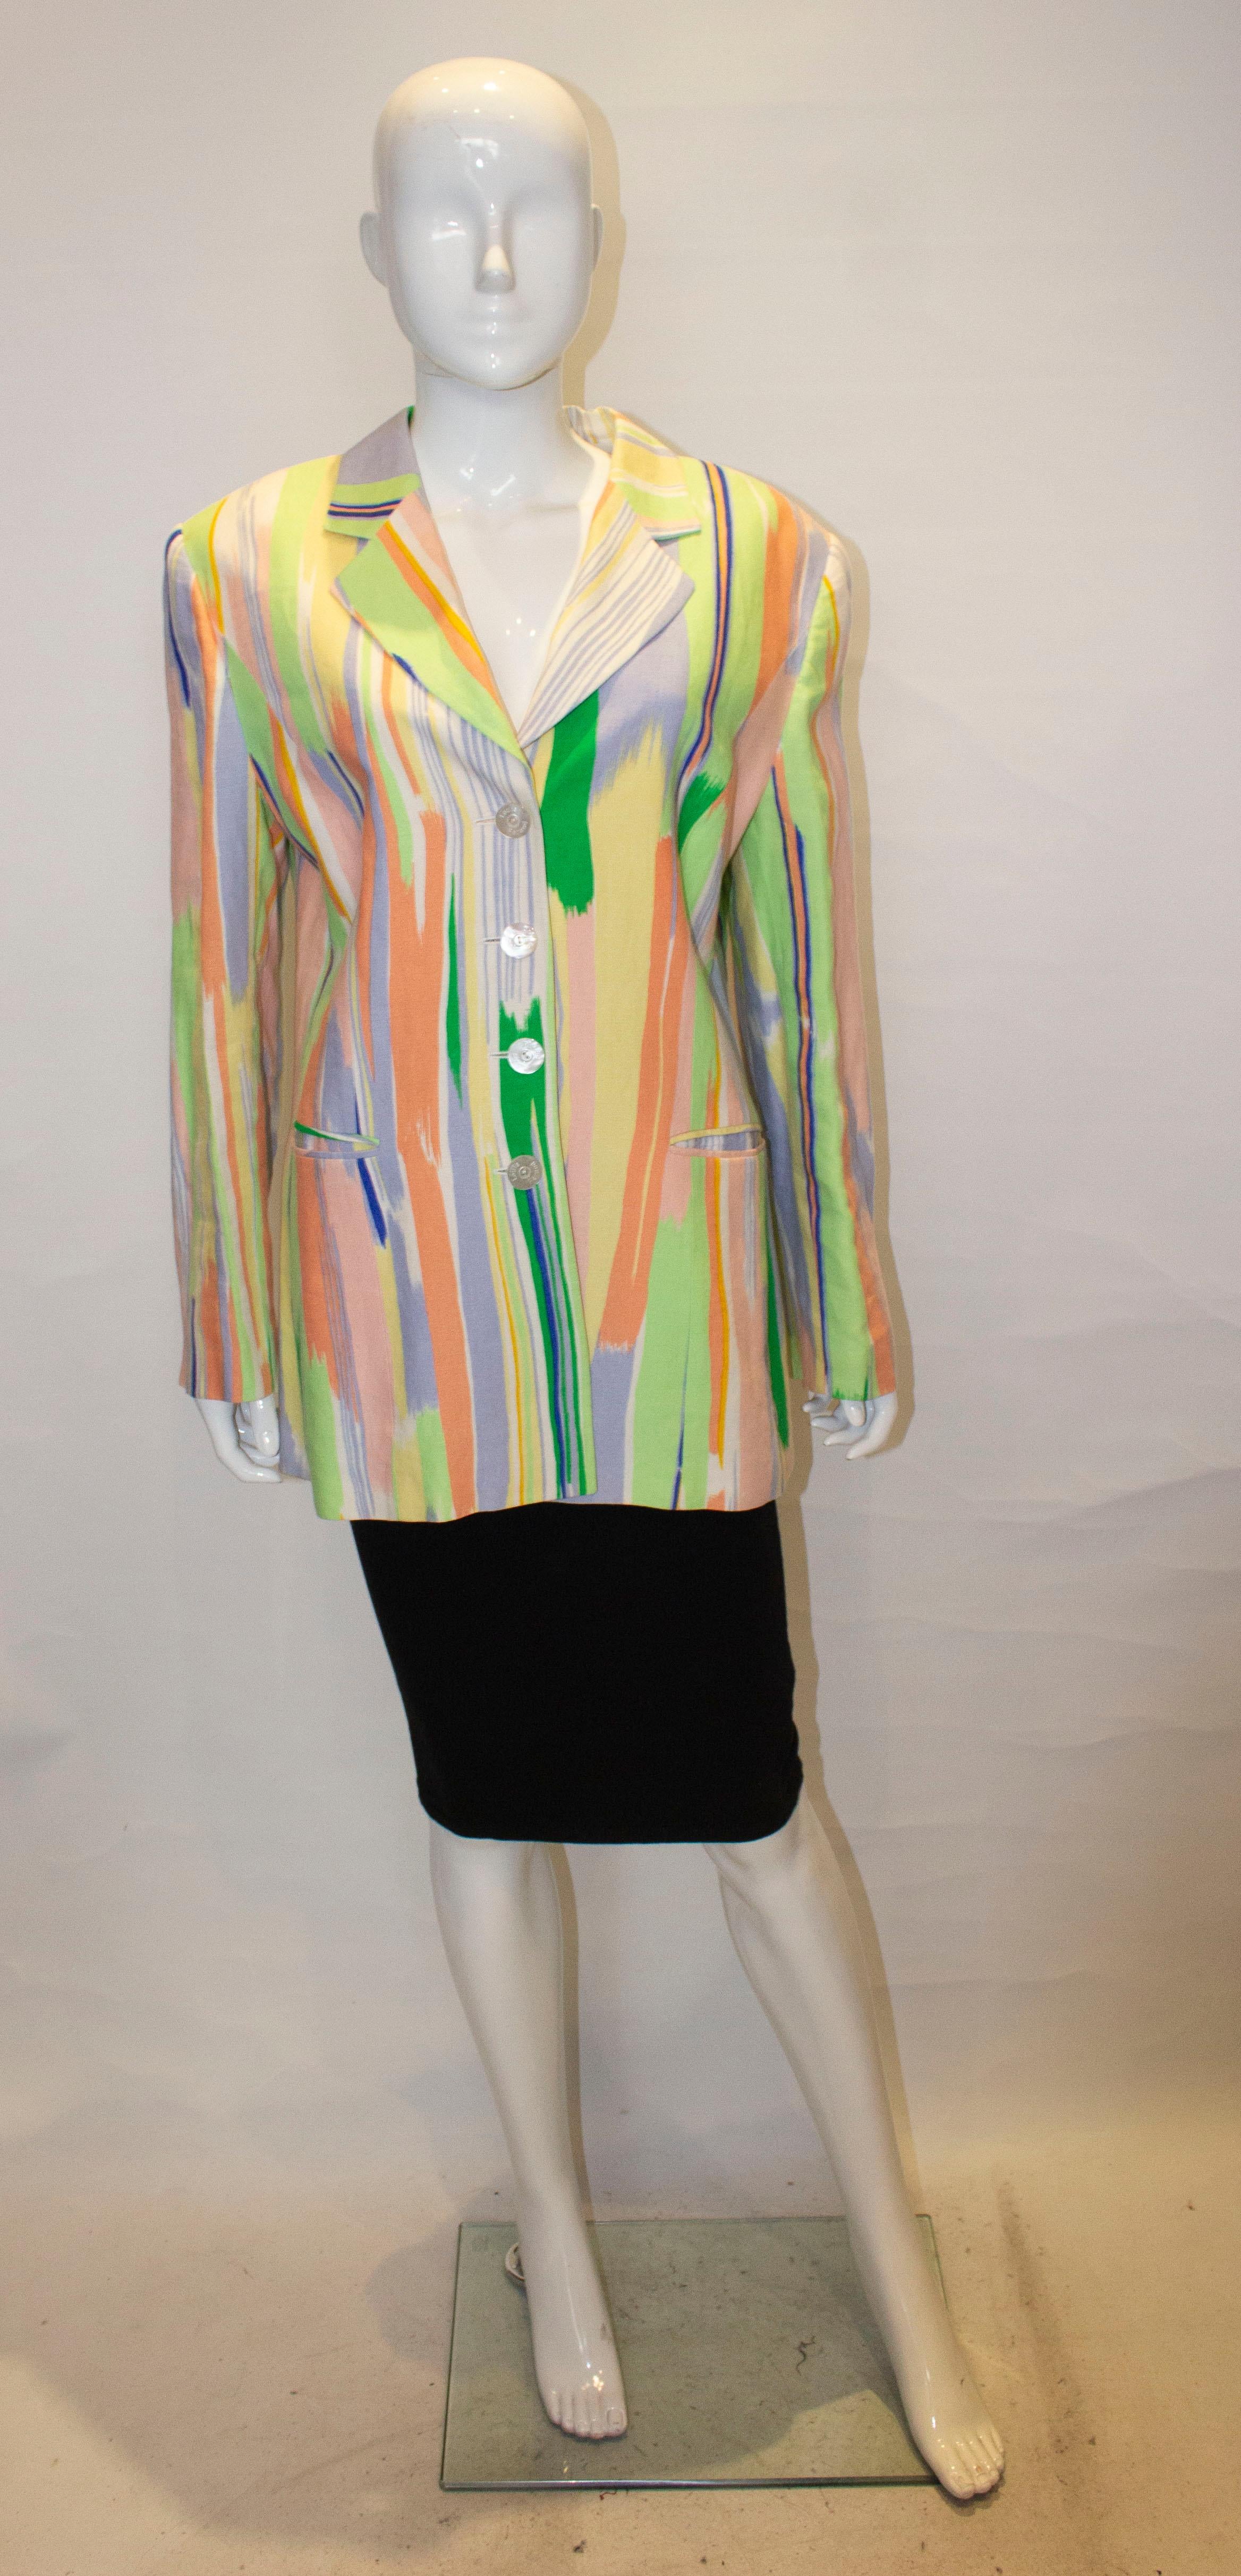 A fun jacket for Spring by Louis Feraud. The jacket is in linen, fully lined and has two pockets.